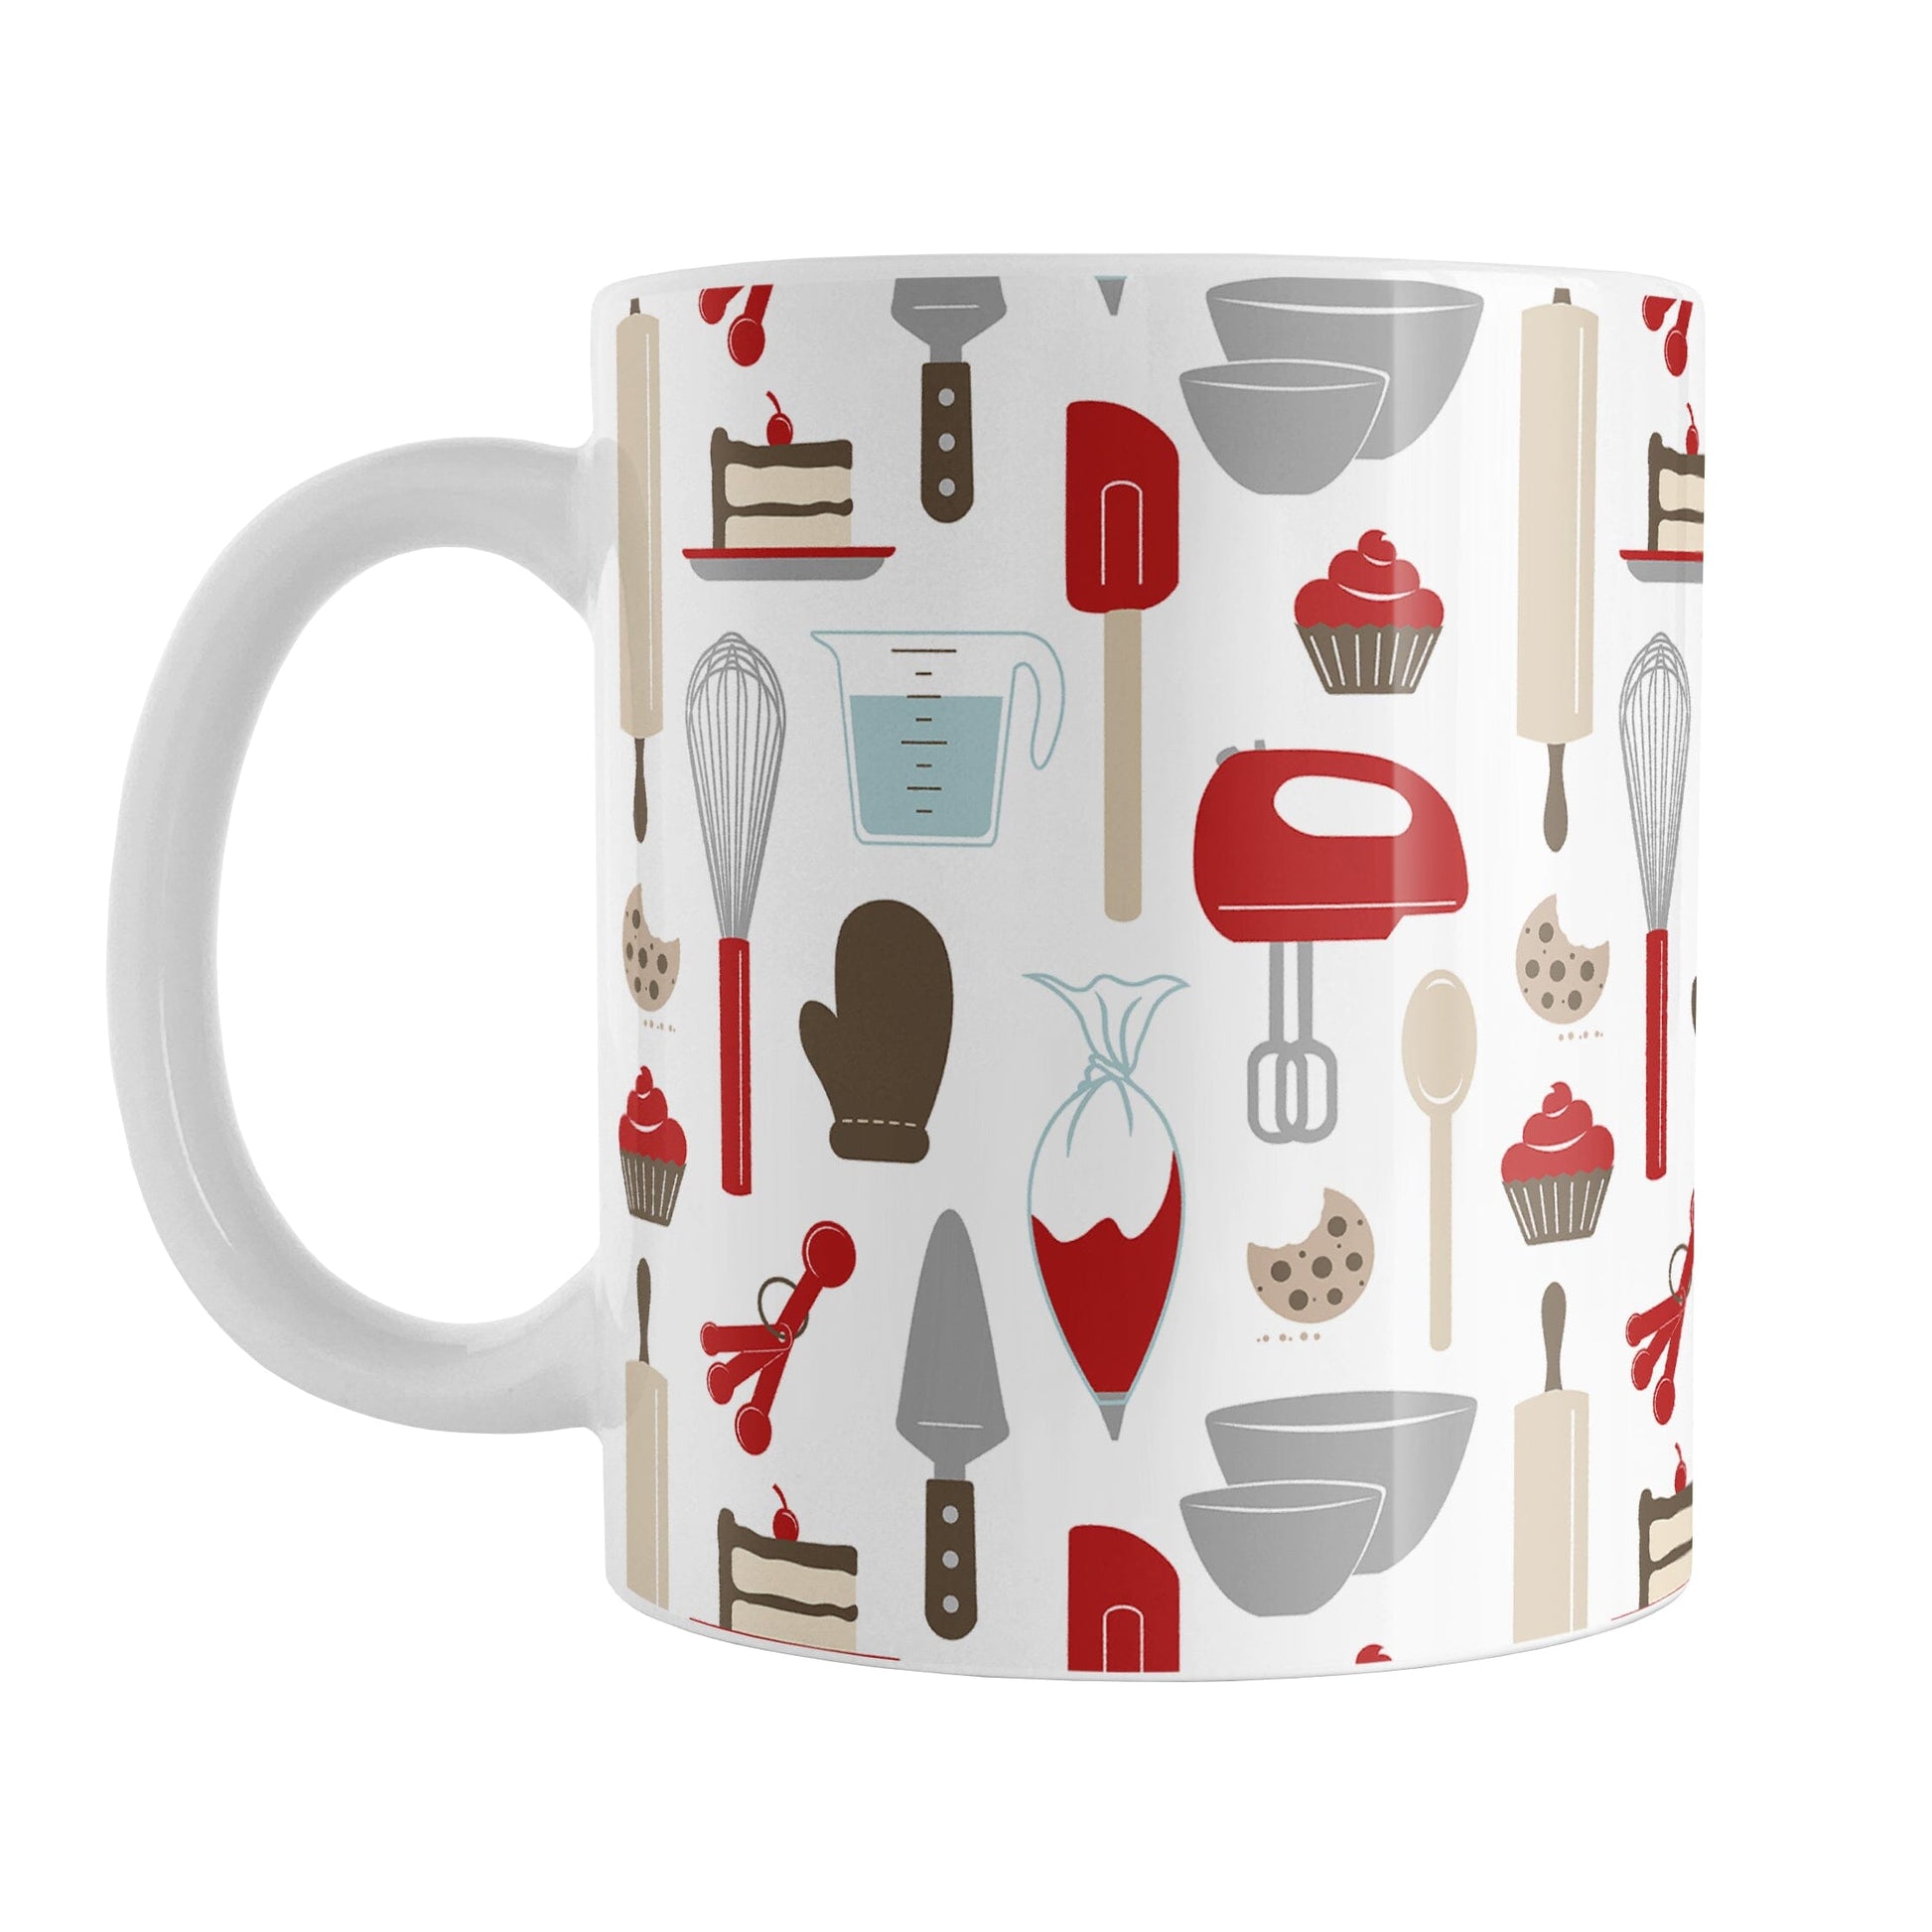 Red Baking Pattern Mug (11oz) at Amy's Coffee Mugs. A ceramic coffee mug designed with a pattern of baking tools like spatulas, whisks, mixers, bowls, and spoons, with cookies, cupcakes, and cake all in a red, gray, brown, and beige color scheme that wraps around the mug. 